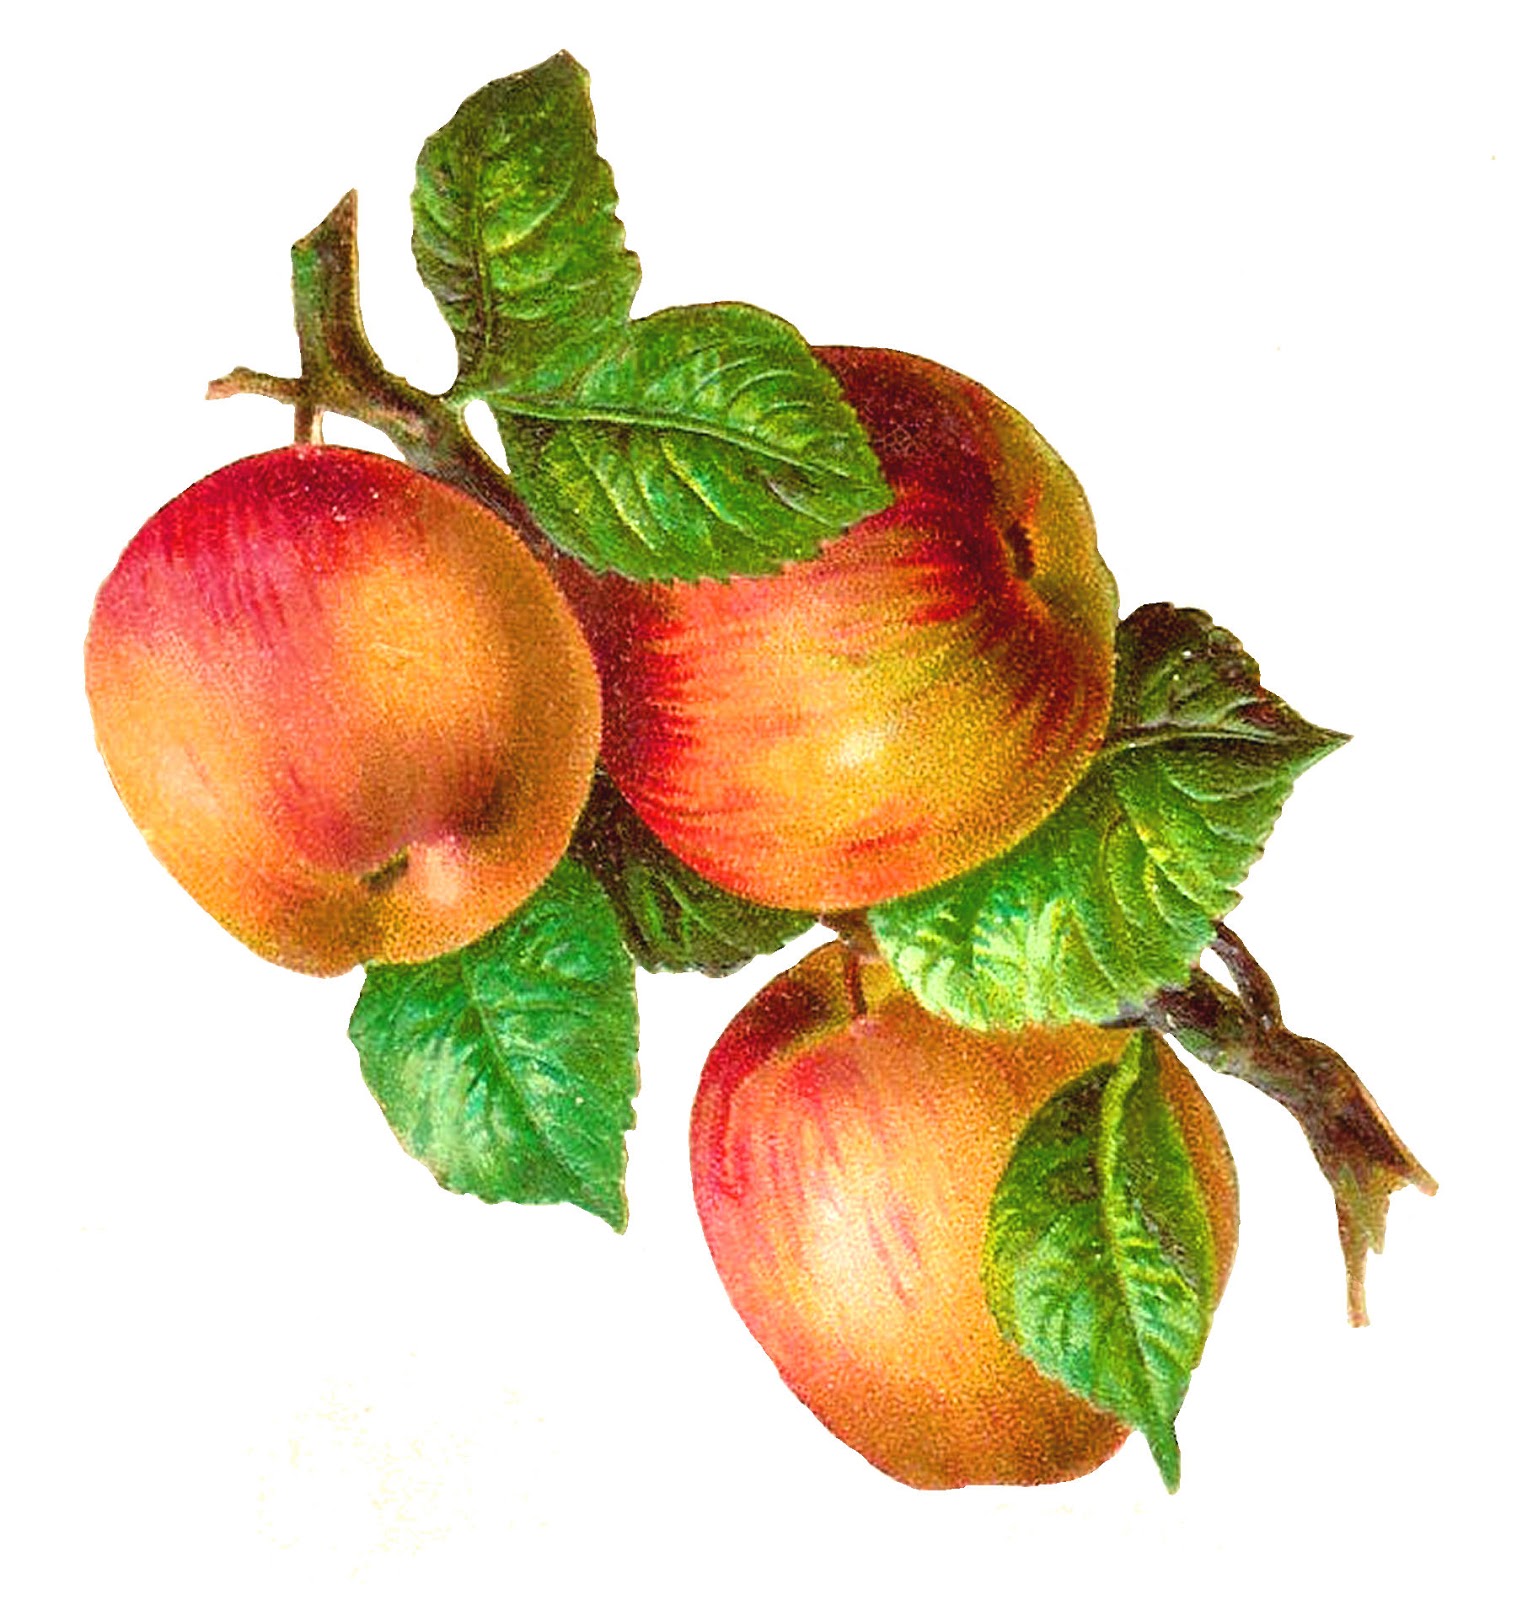 Antique Images: Free Fruit Clip Art: 3 Gala Apples on a Branch Graphic